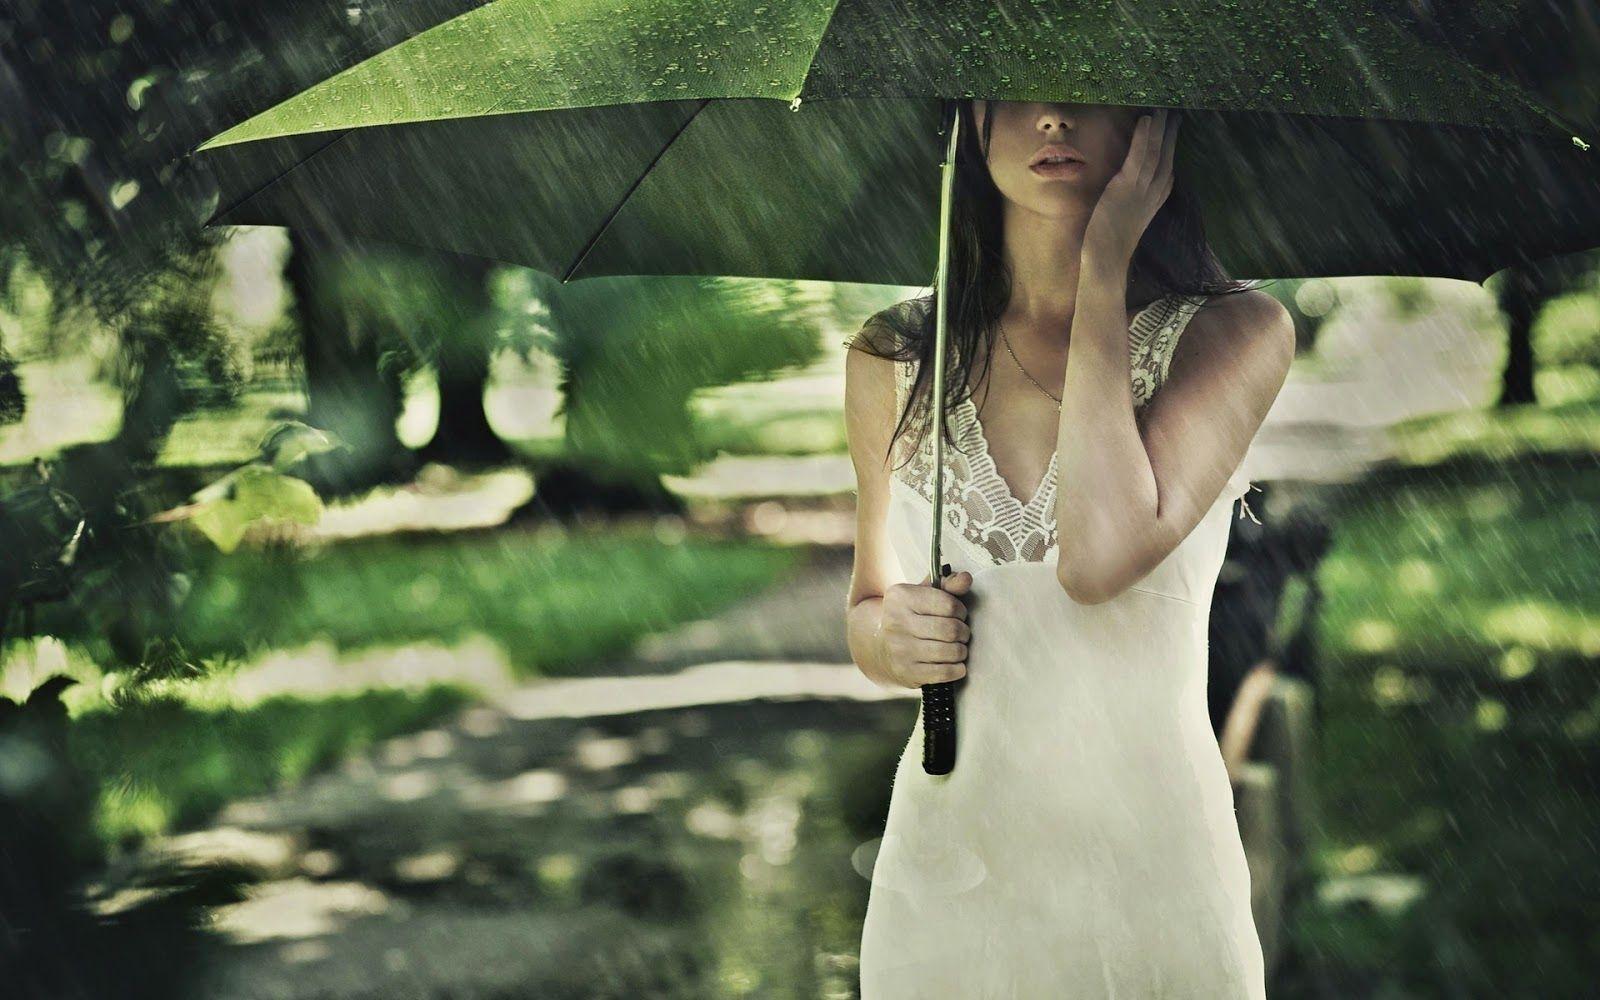 Girl in rain wallpaper. Most beautiful places in the world. Download Free Wallpaper